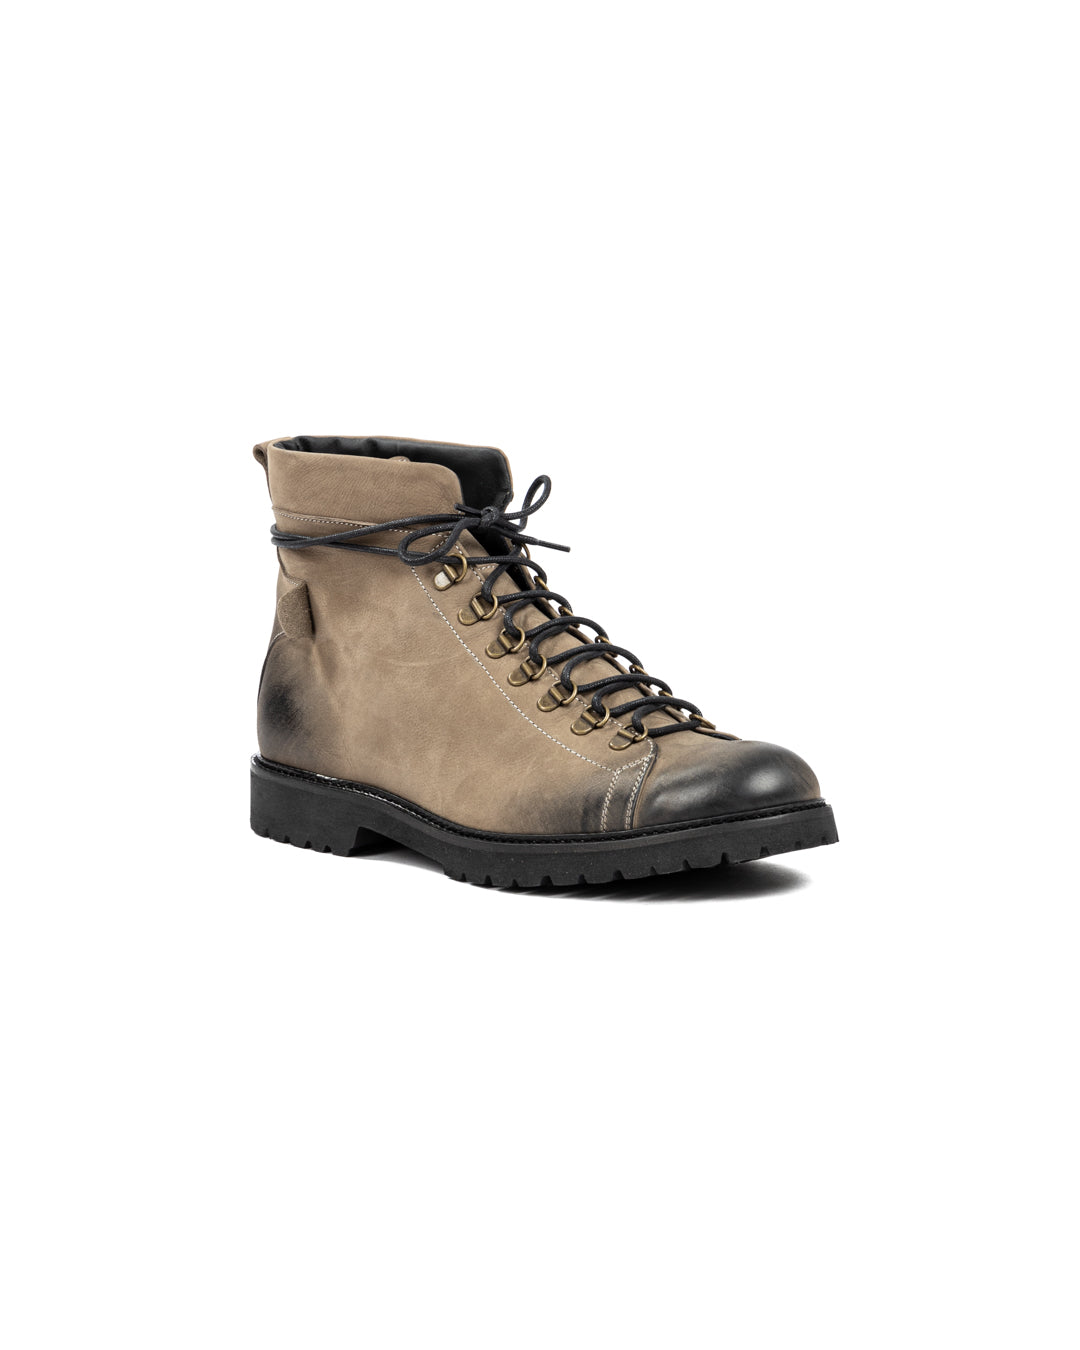 APOLLO - TAUPE NUBUCK LEATHER ANKLE BOOT